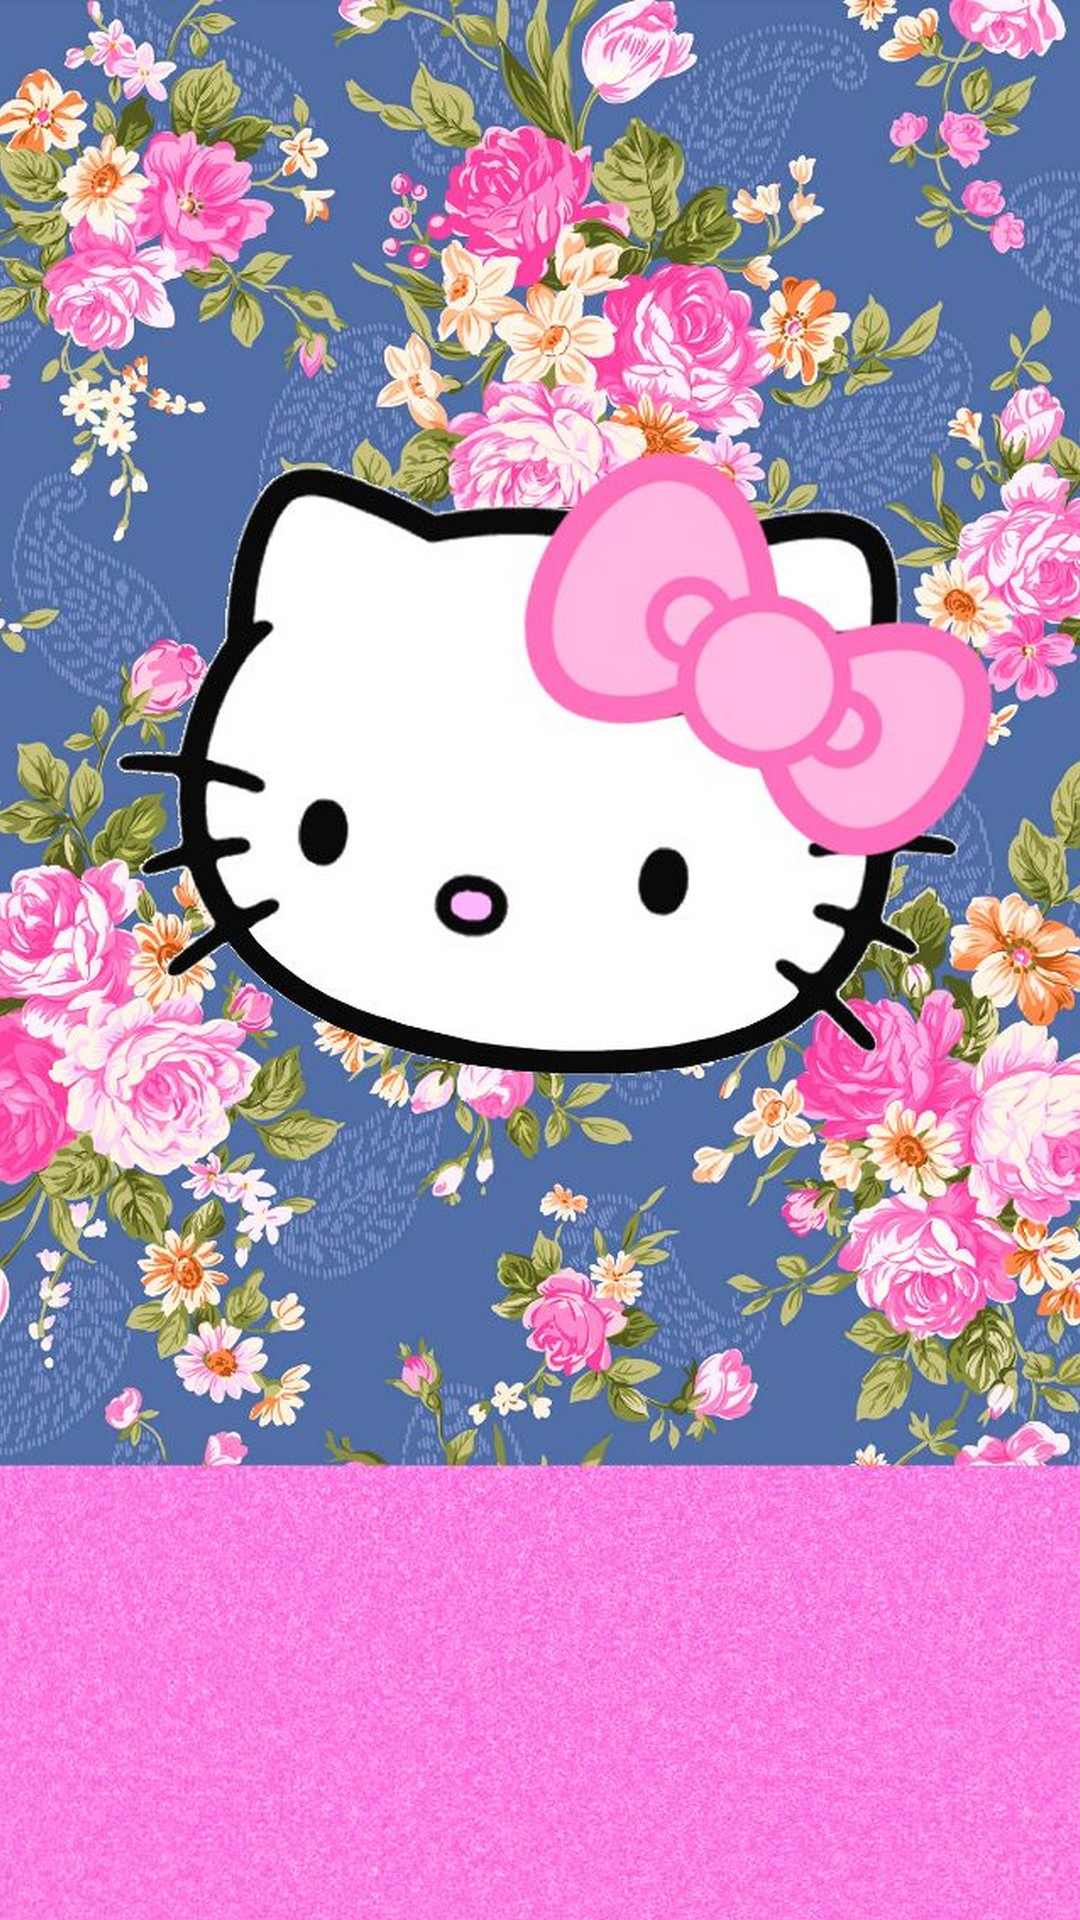 Wallpaper Hello Kitty Images Android with resolution 1080X1920 pixel. You can make this wallpaper for your Android backgrounds, Tablet, Smartphones Screensavers and Mobile Phone Lock Screen